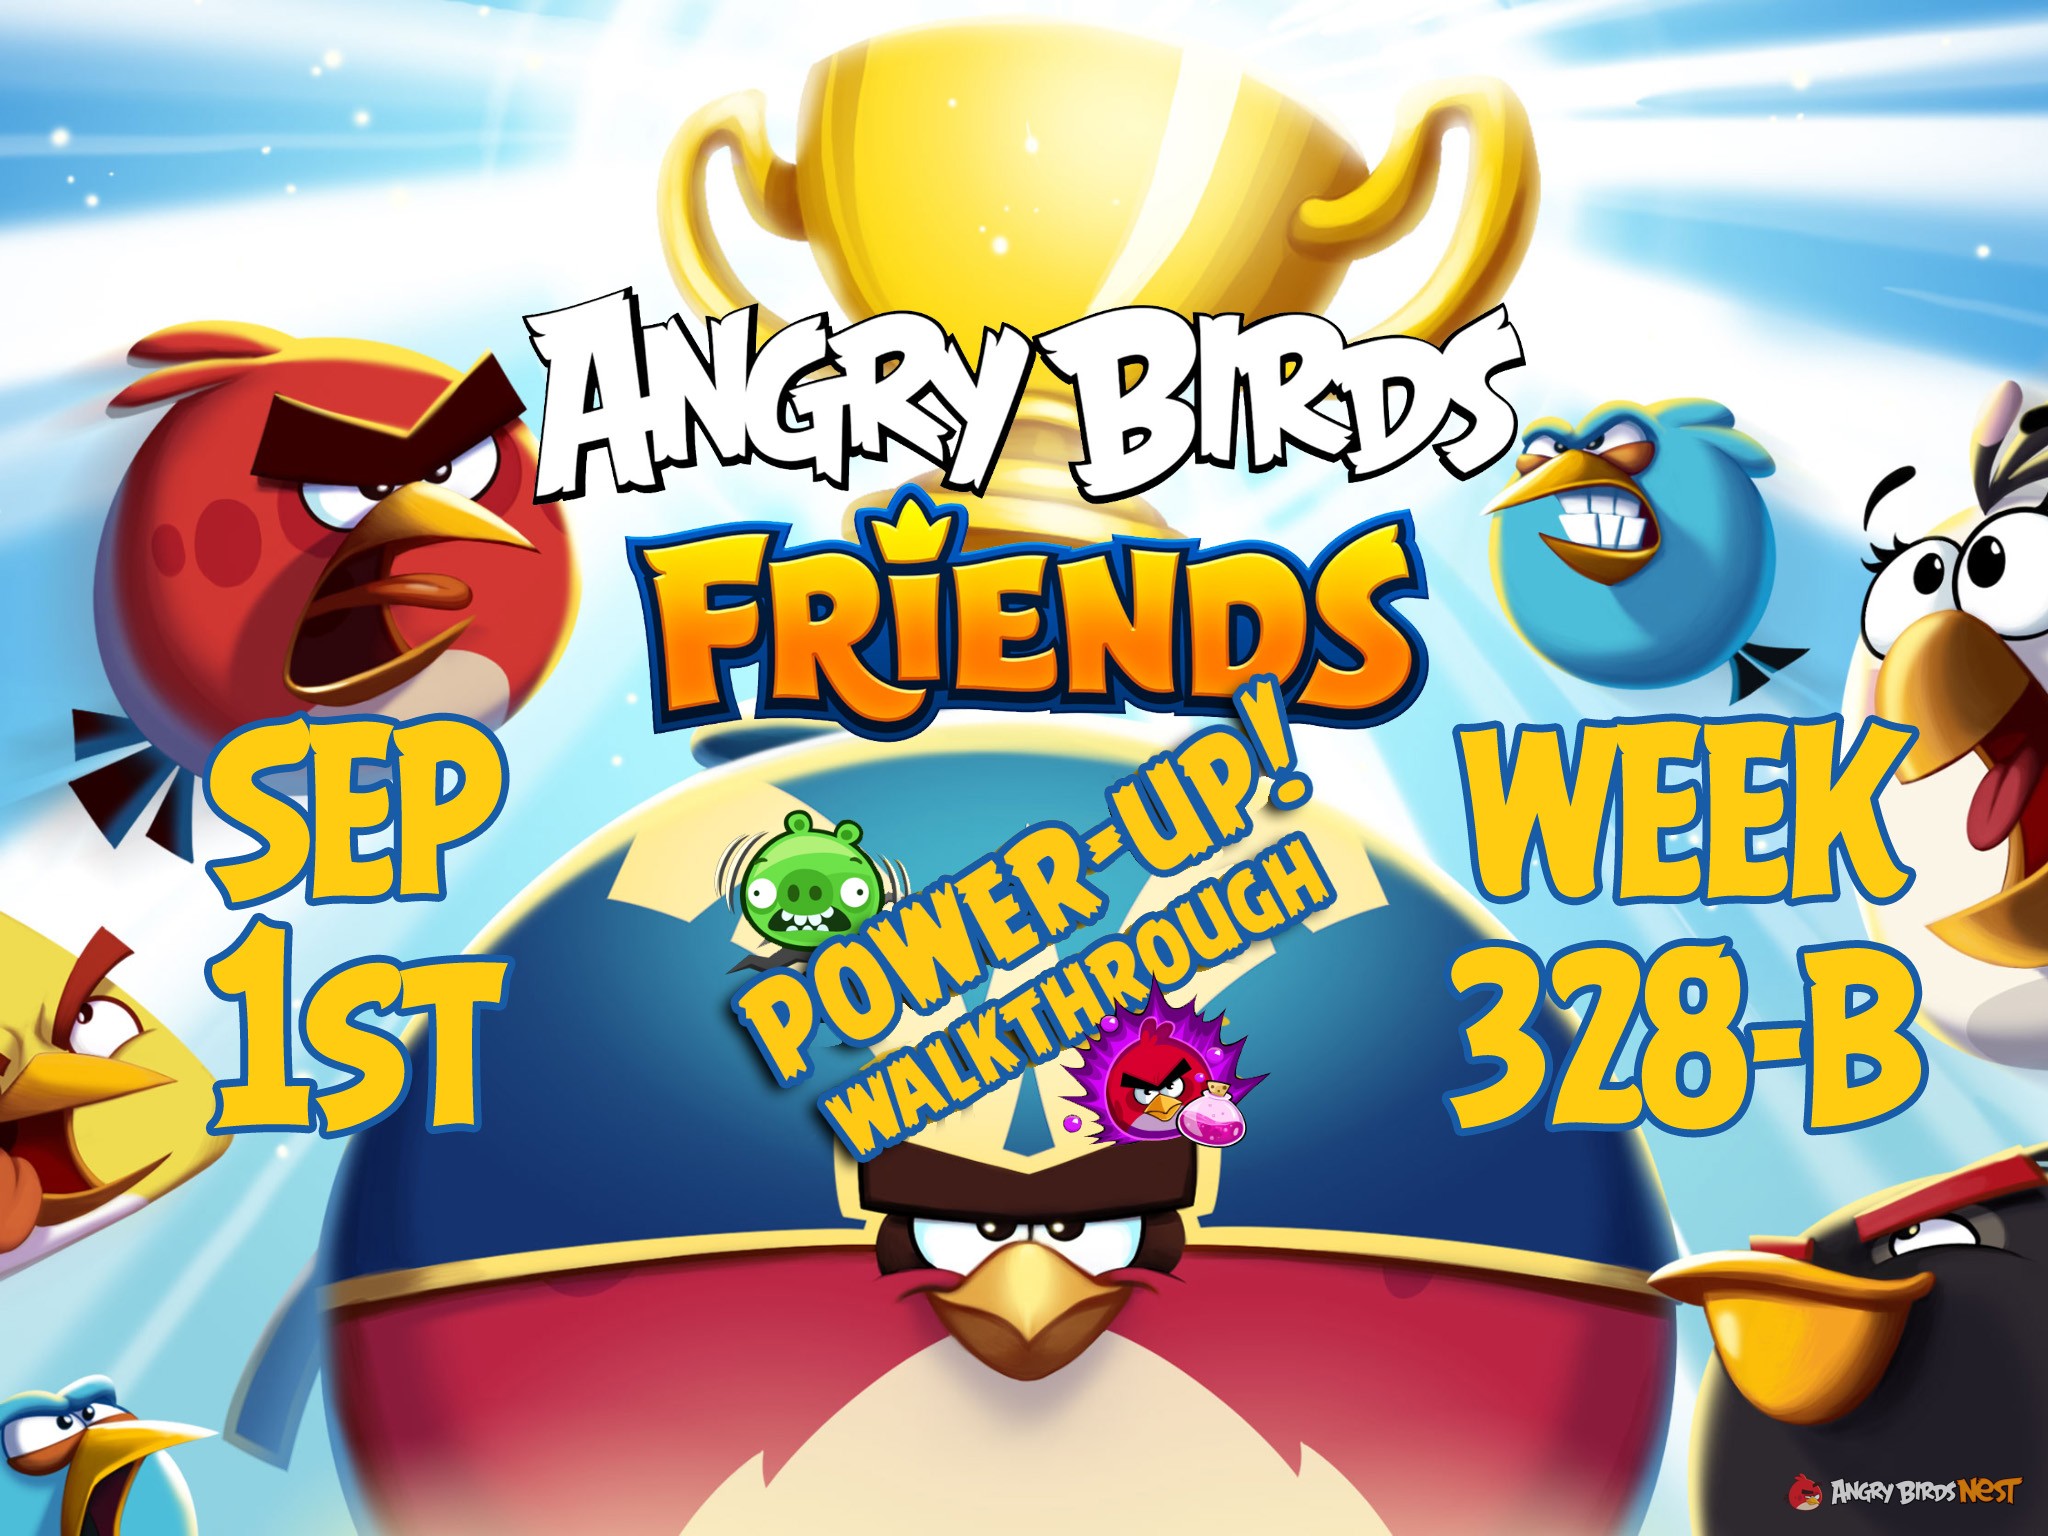 Angry-Birds-Friends-Tournament-Week-328-B-Feature-Image-PU